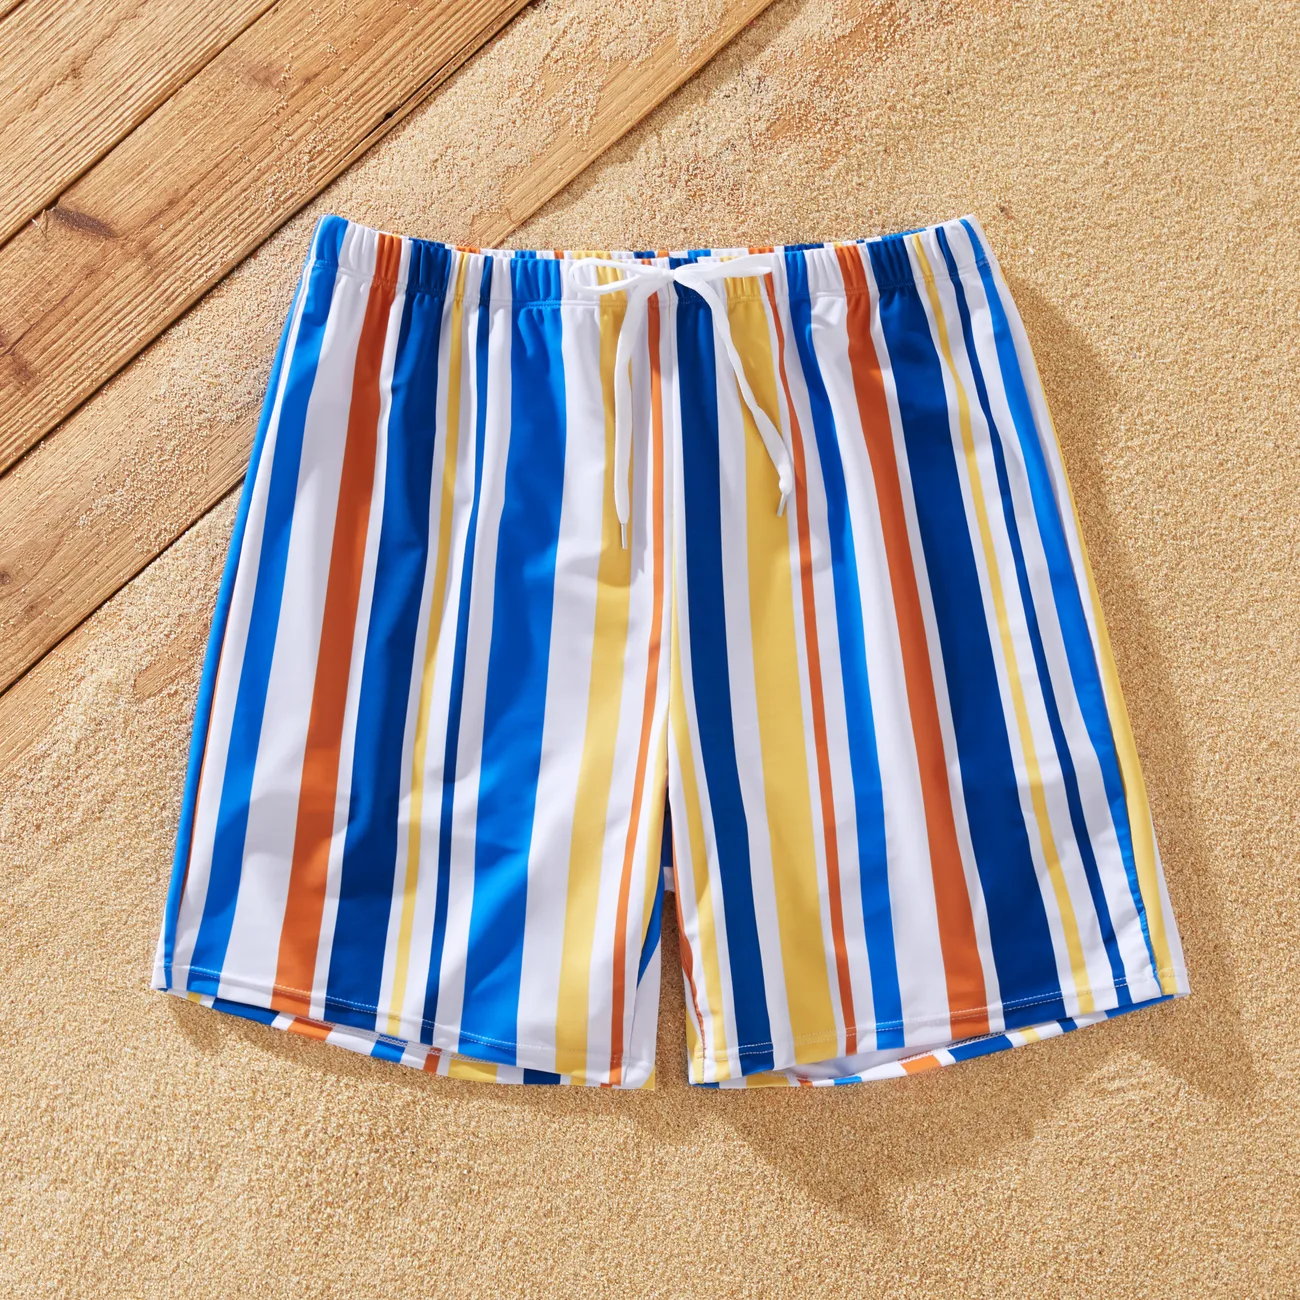 Family Matching Stripe Swim Trunks or Ditsy Floral Shirred Two-Piece Swimsuit  Multi-color big image 1